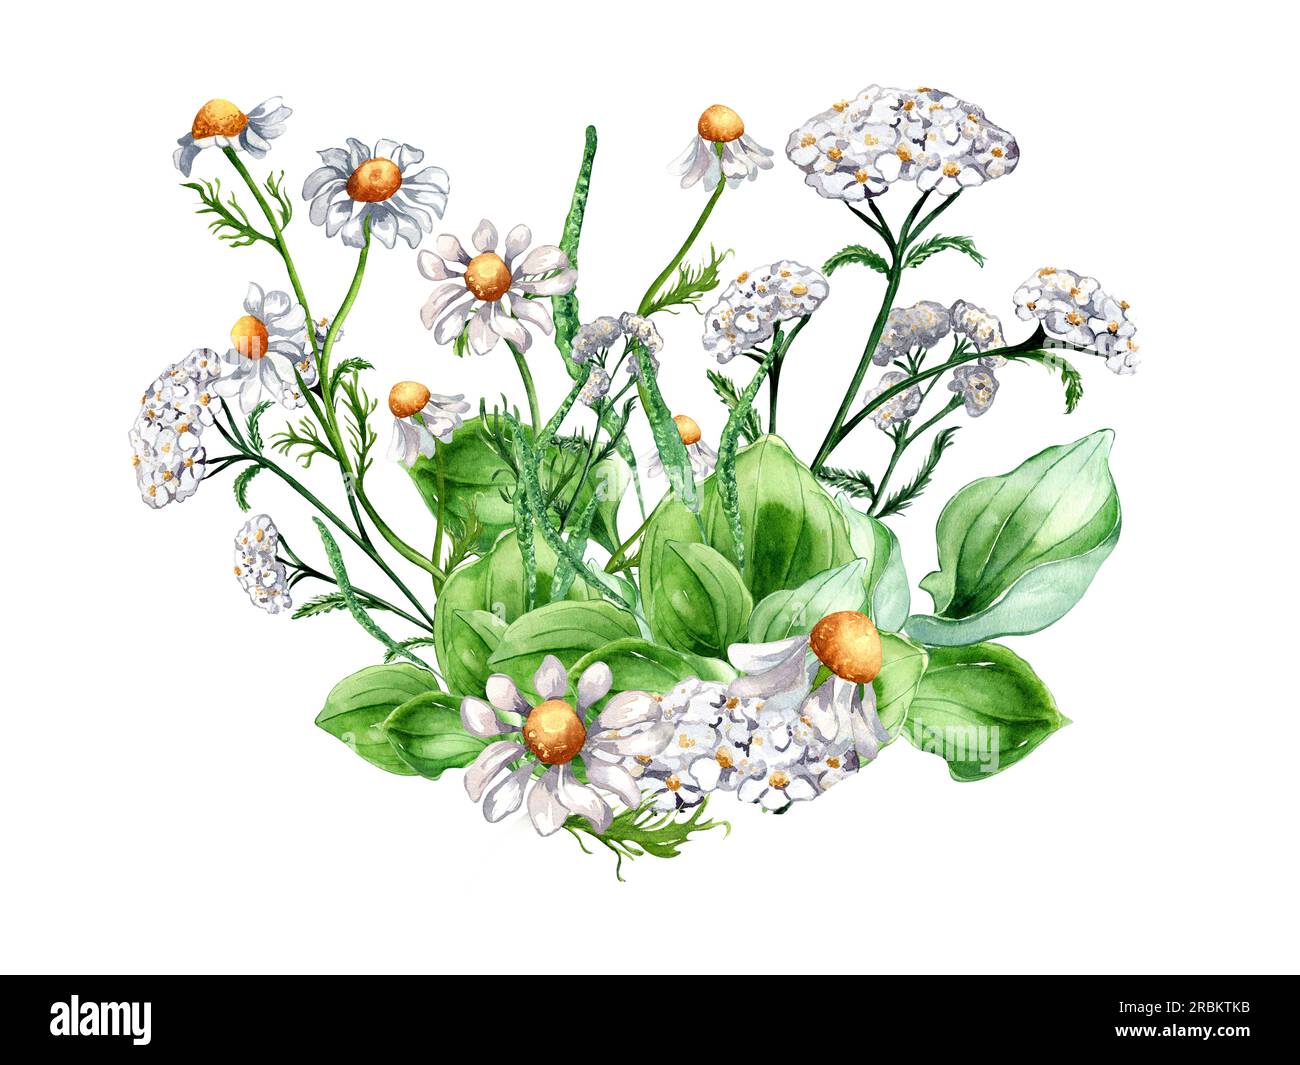 Bouquet of meadow medicinal flower, herb plants watercolor illustration isolated on white background. Daisy, camomile, plantain, achillea millefolium Stock Photo